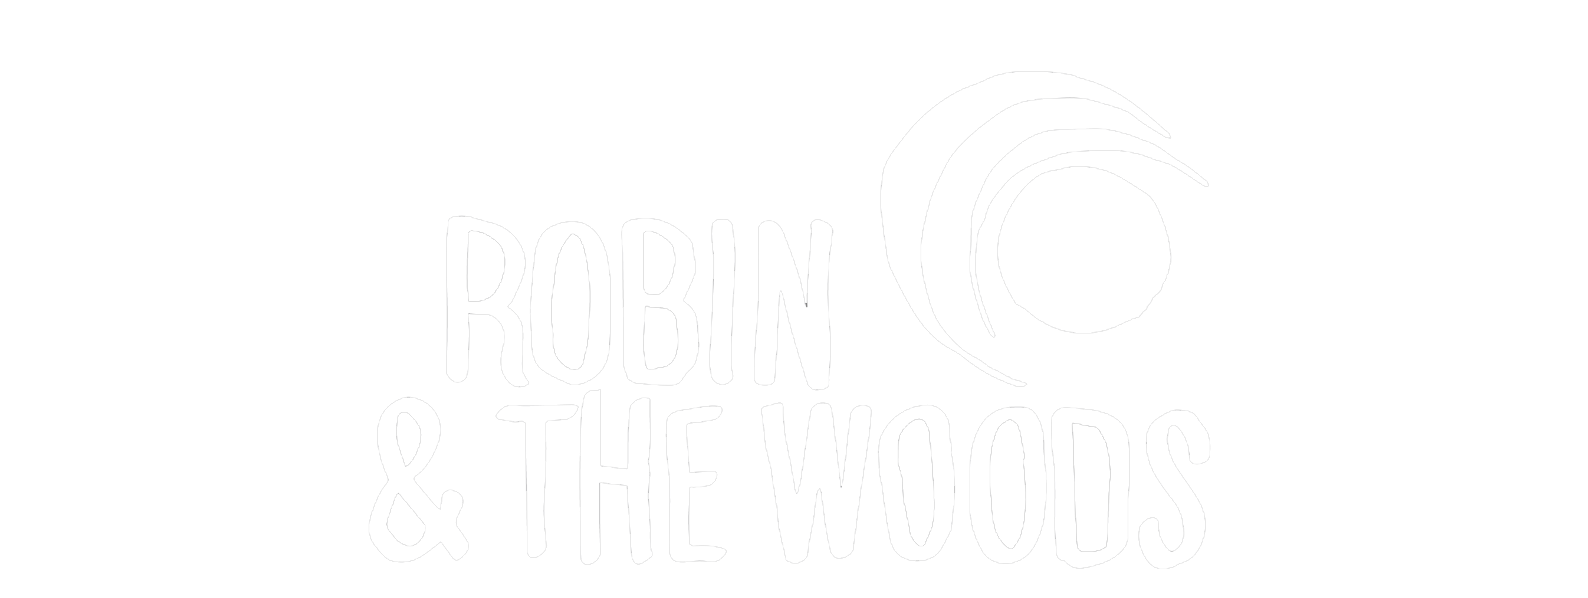 Robin & the Woods